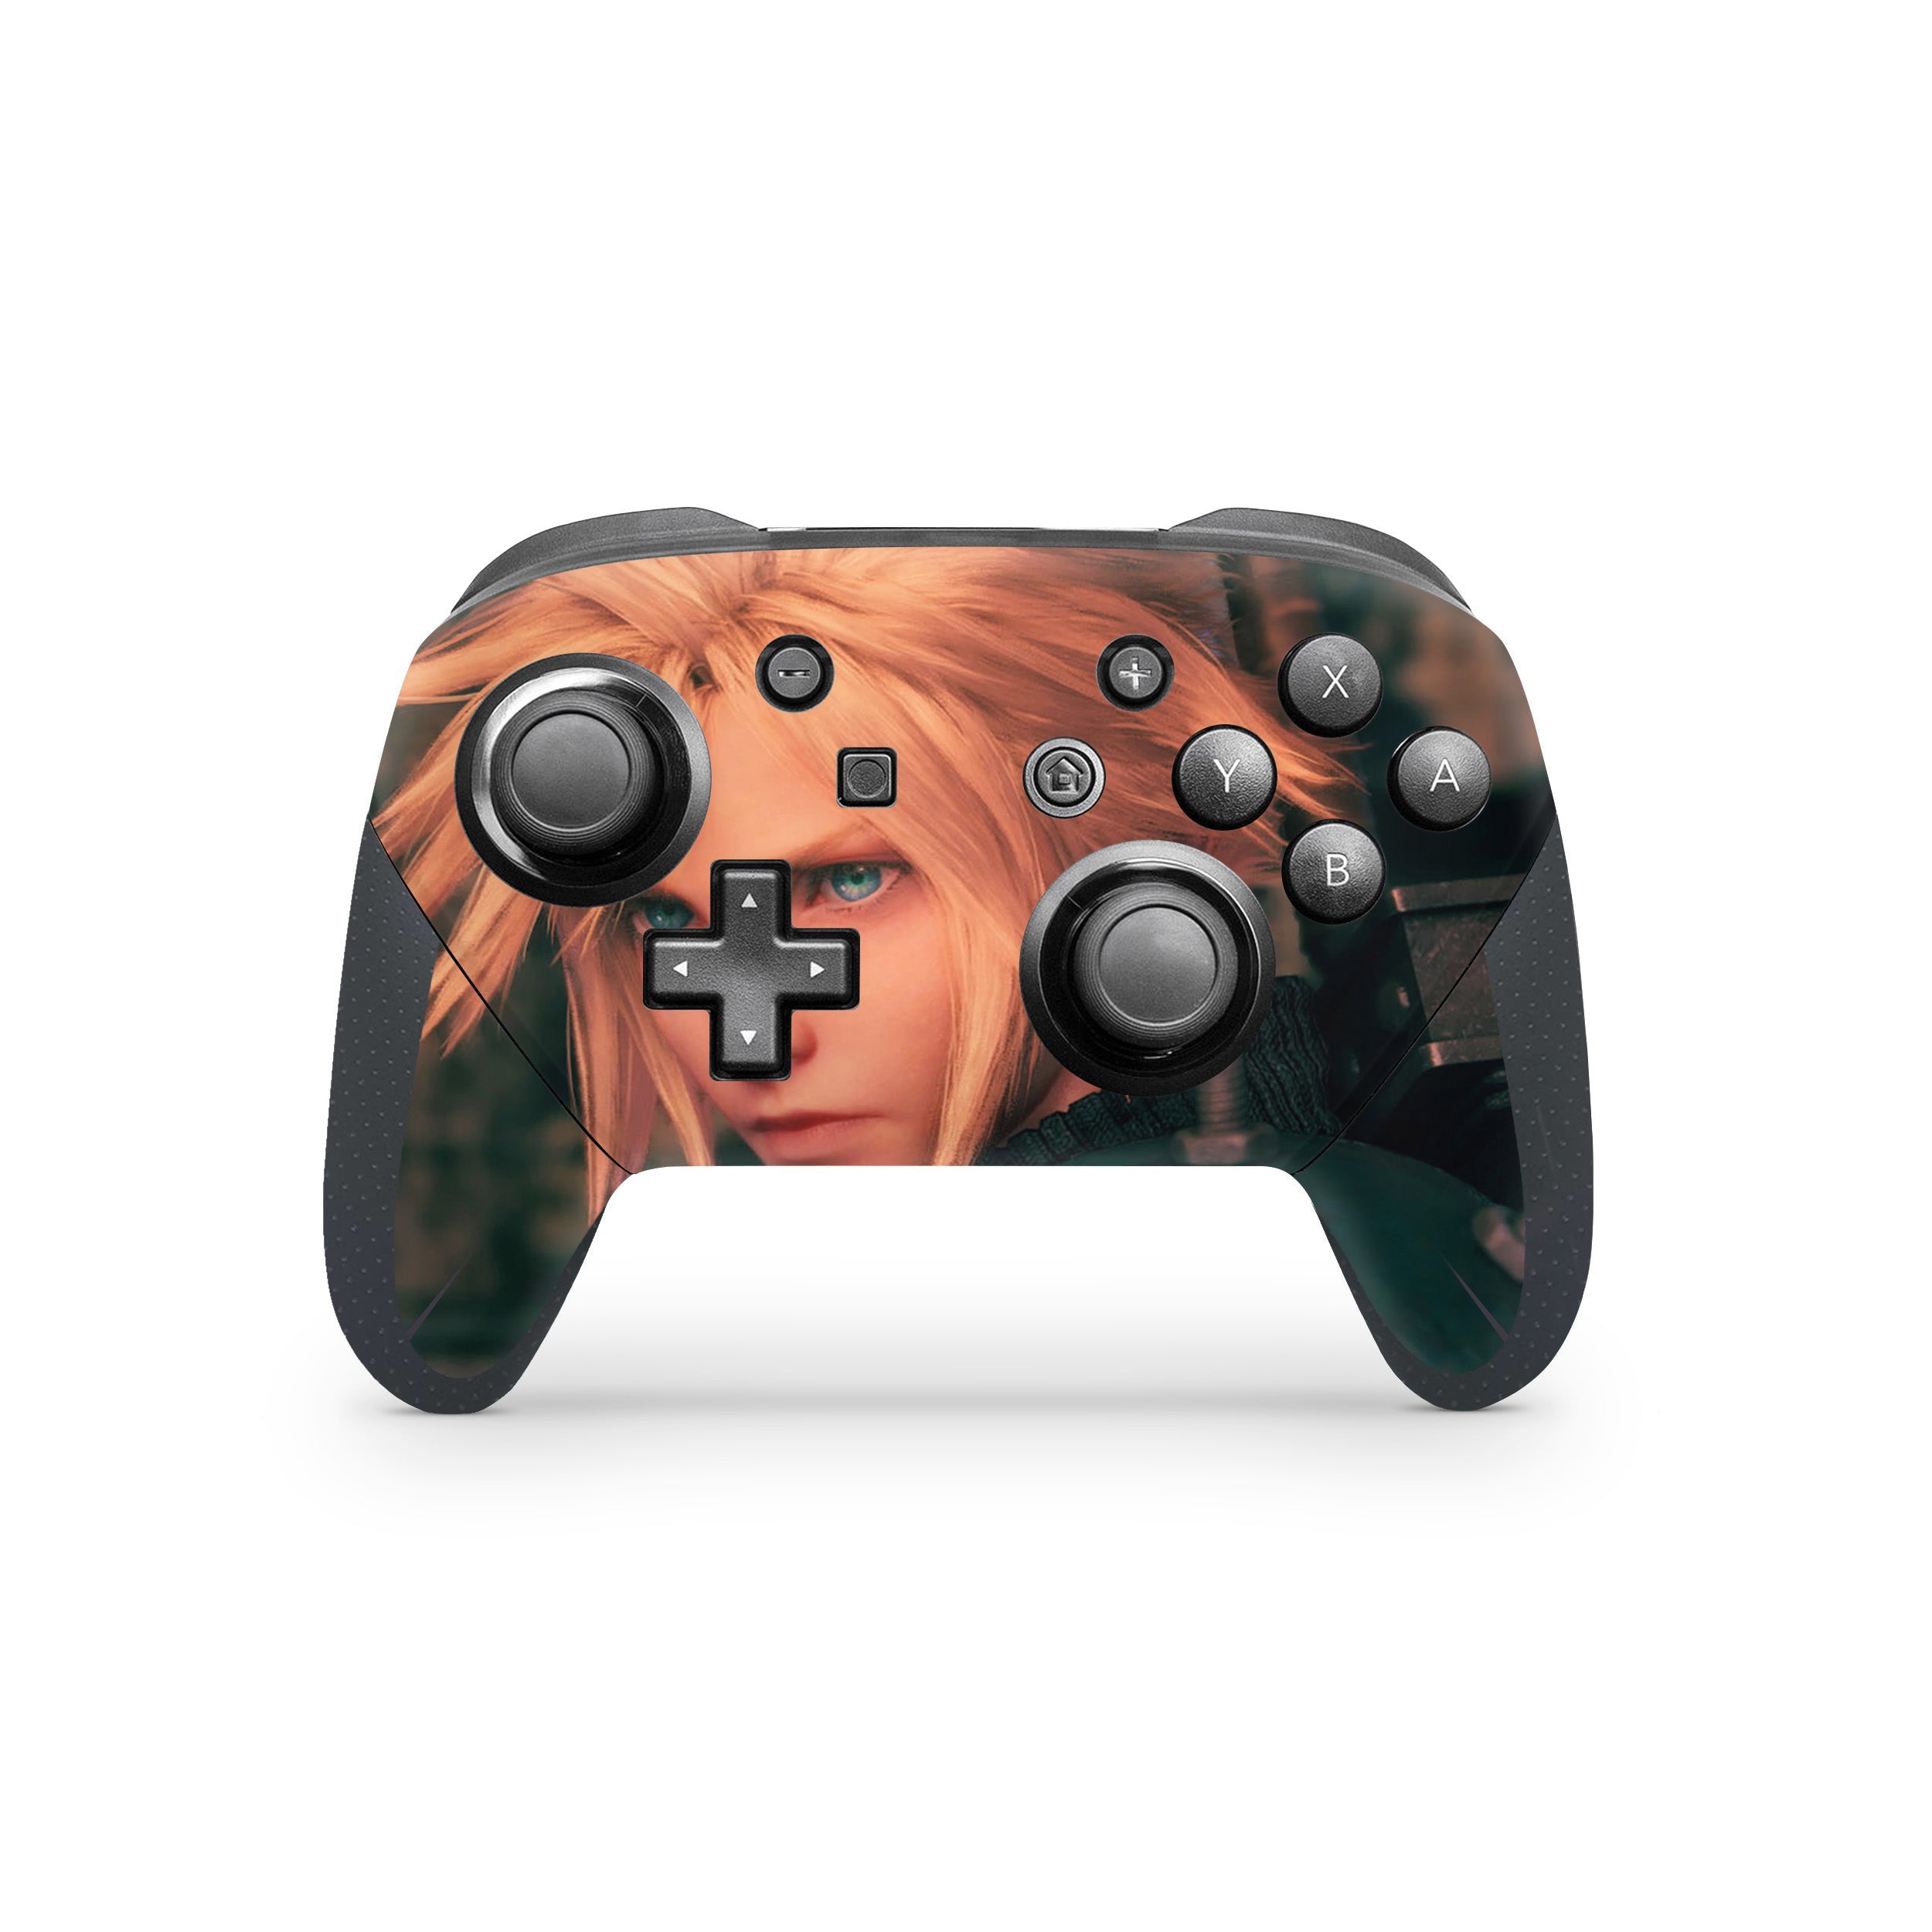 A video game skin featuring a Final Fantasy 7 Remake Cloud design for the Switch Pro Controller.